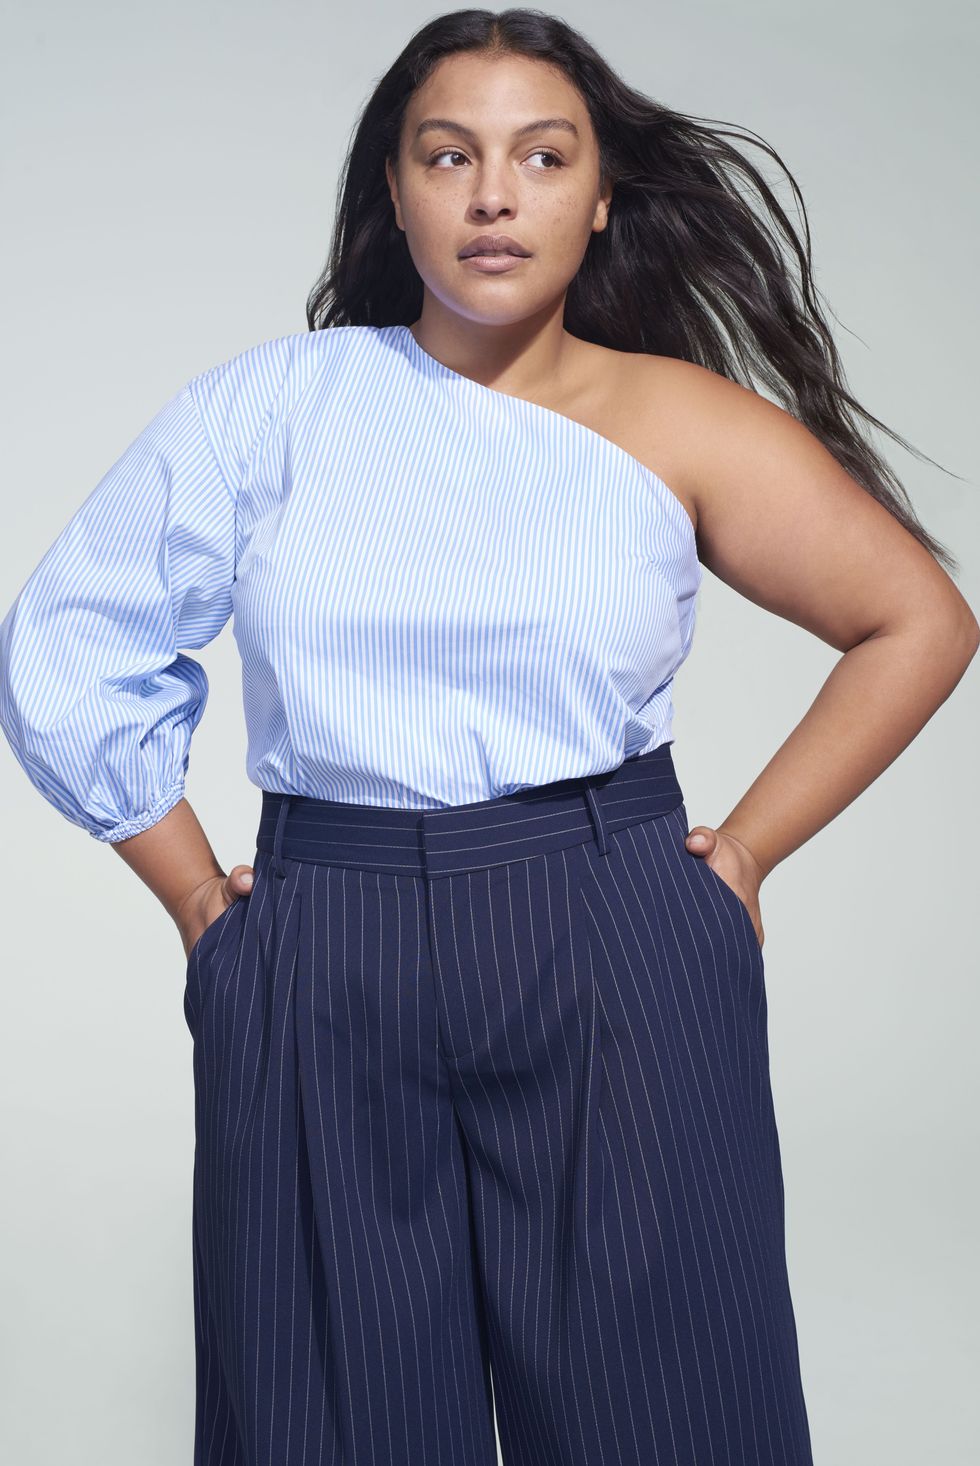 Jason Wu's Plus-Size Collection Is Dropping Just In Time For The Holidays